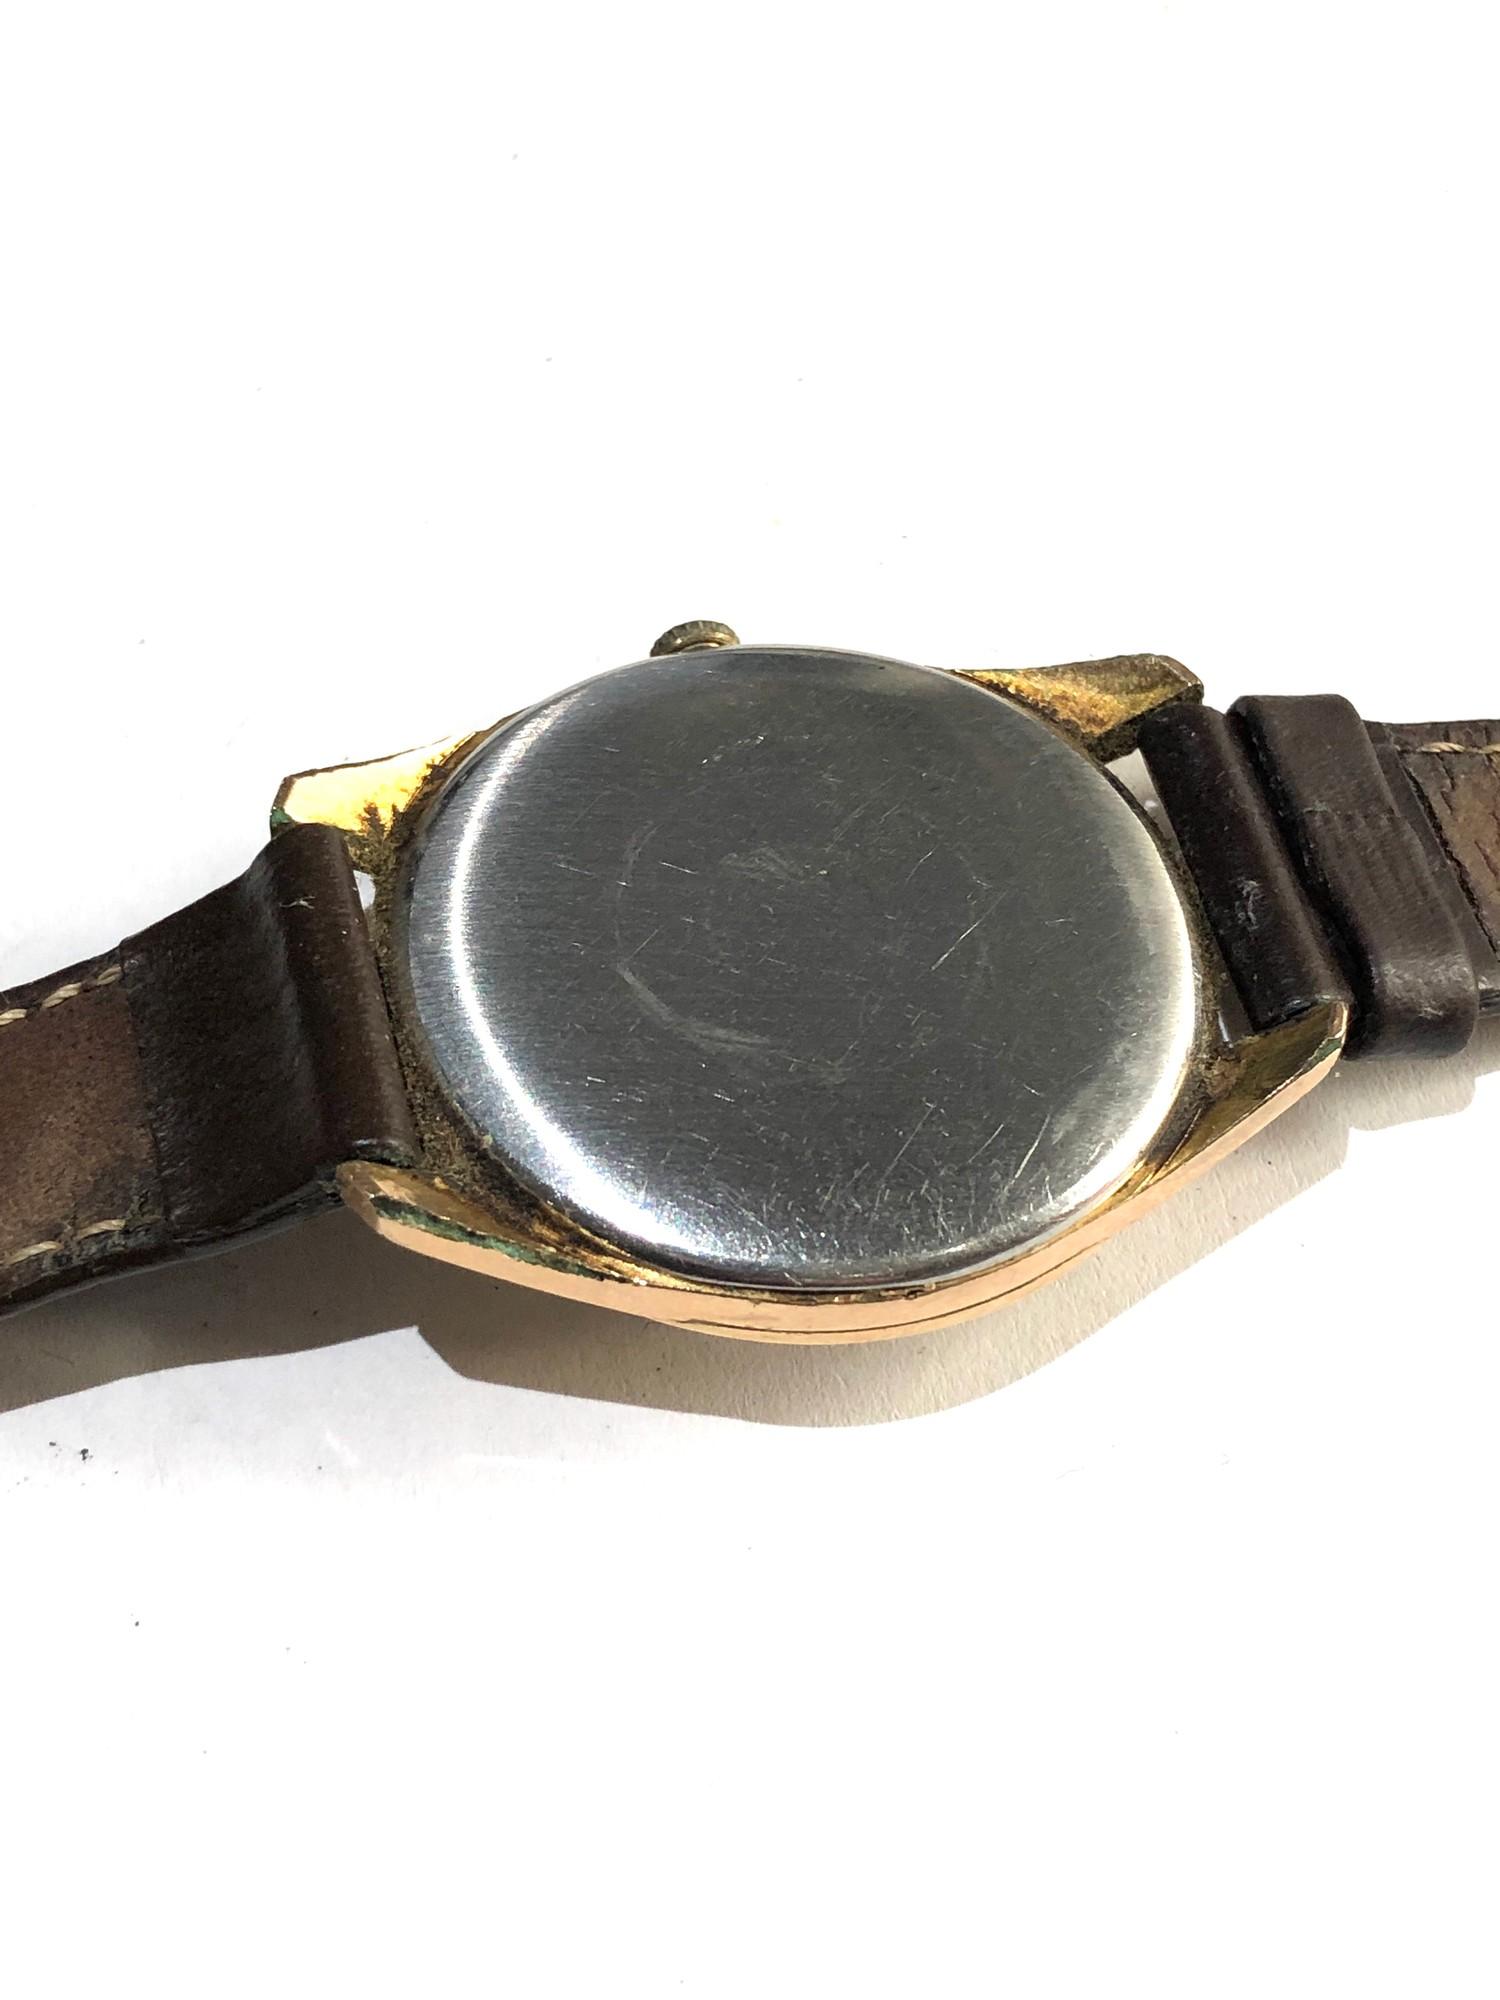 Vintage gents Tissot stylist wristwatch manual wind watch it winds and ticks but no warranty given - Image 3 of 3